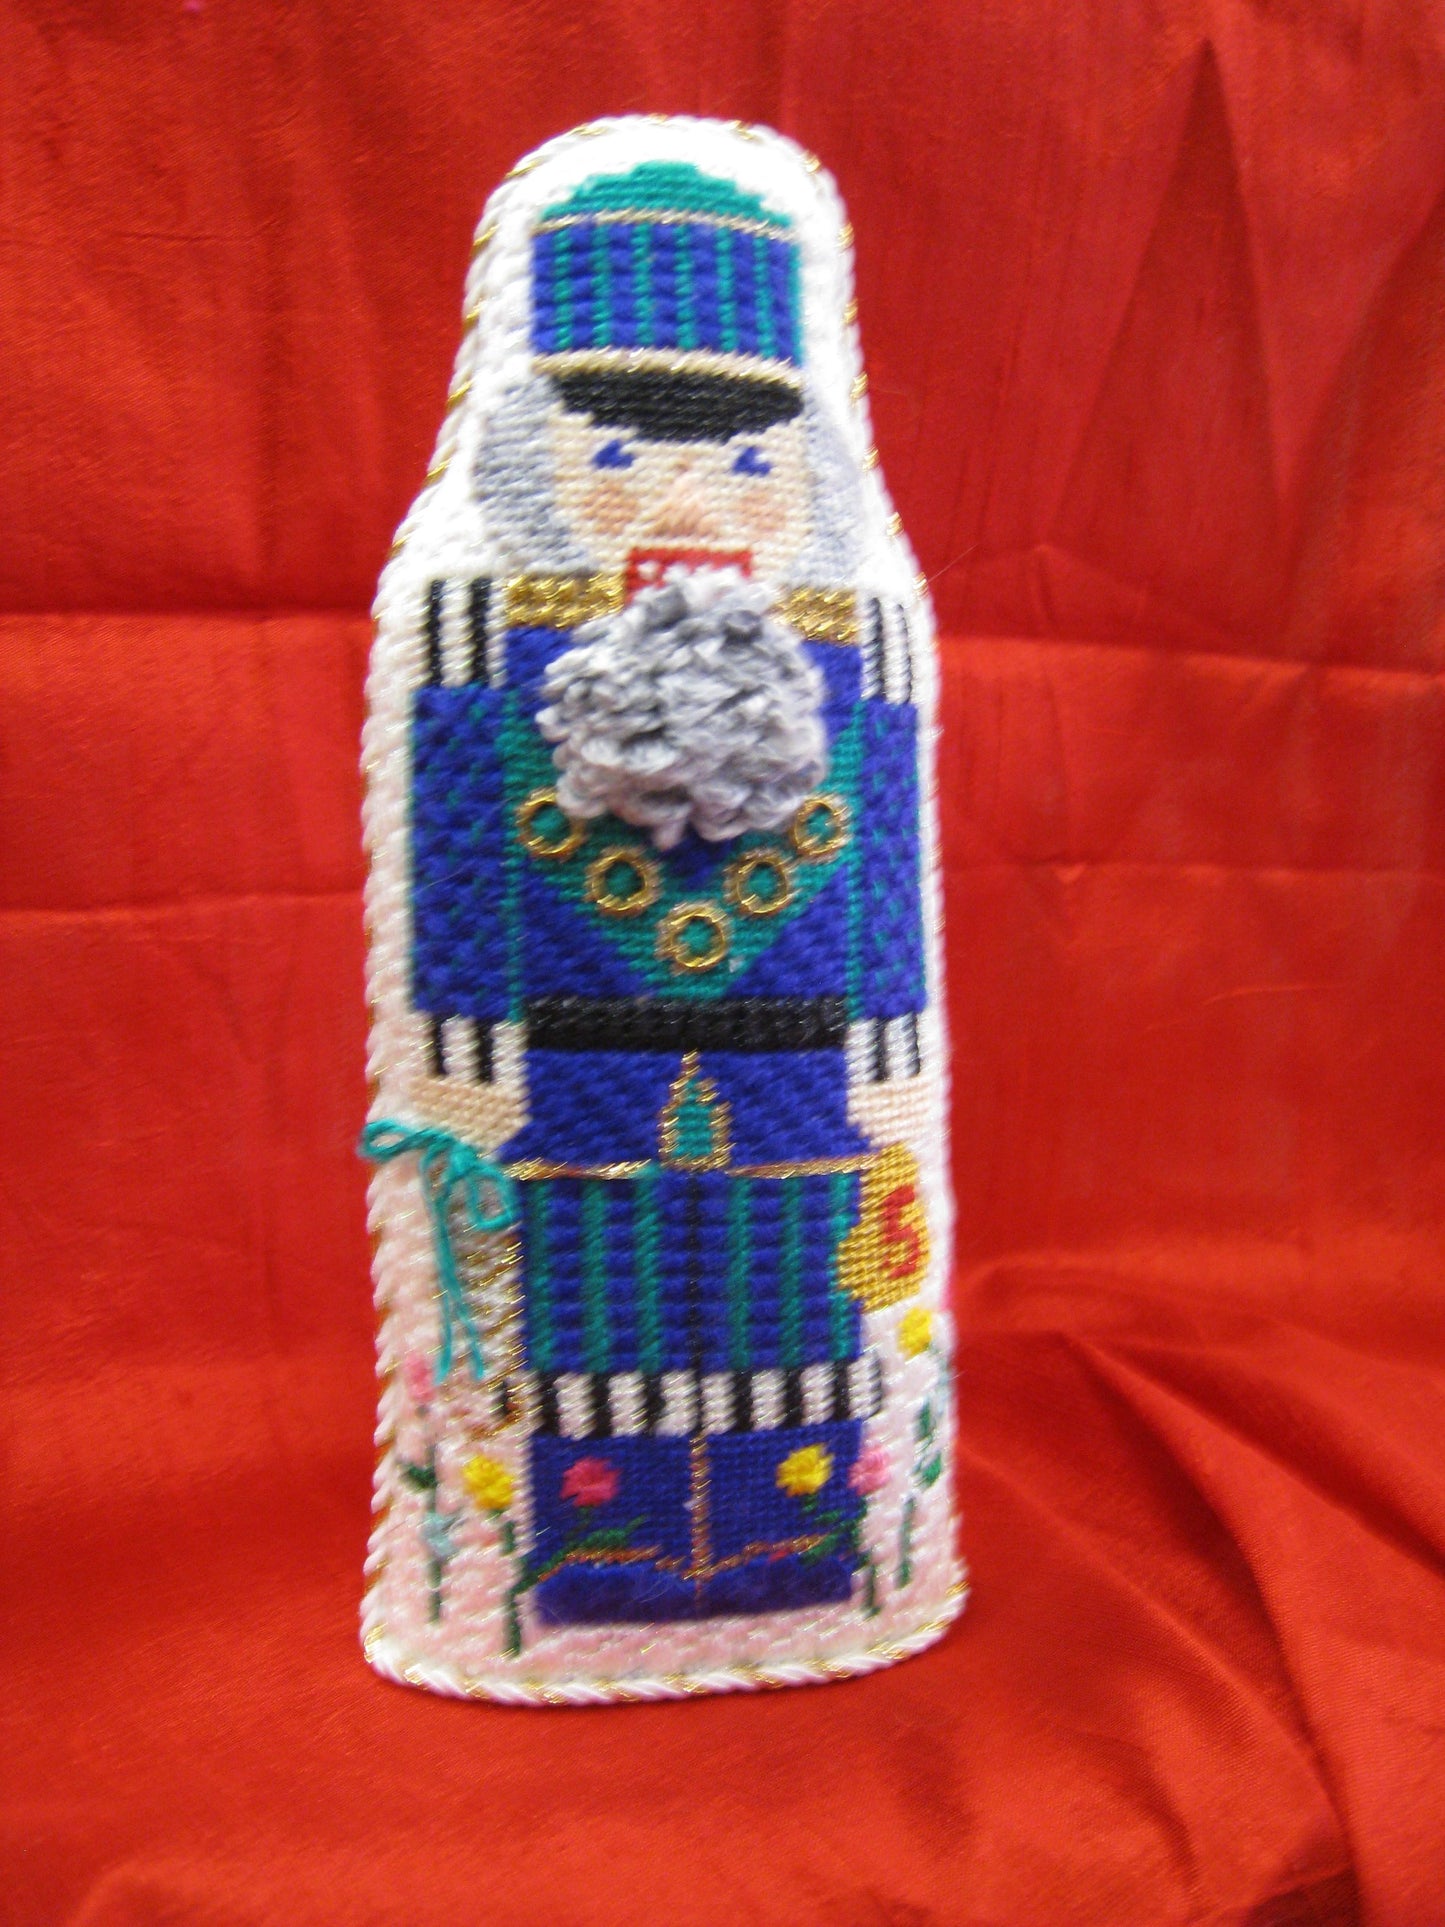 May Nutcracker with stitch guide